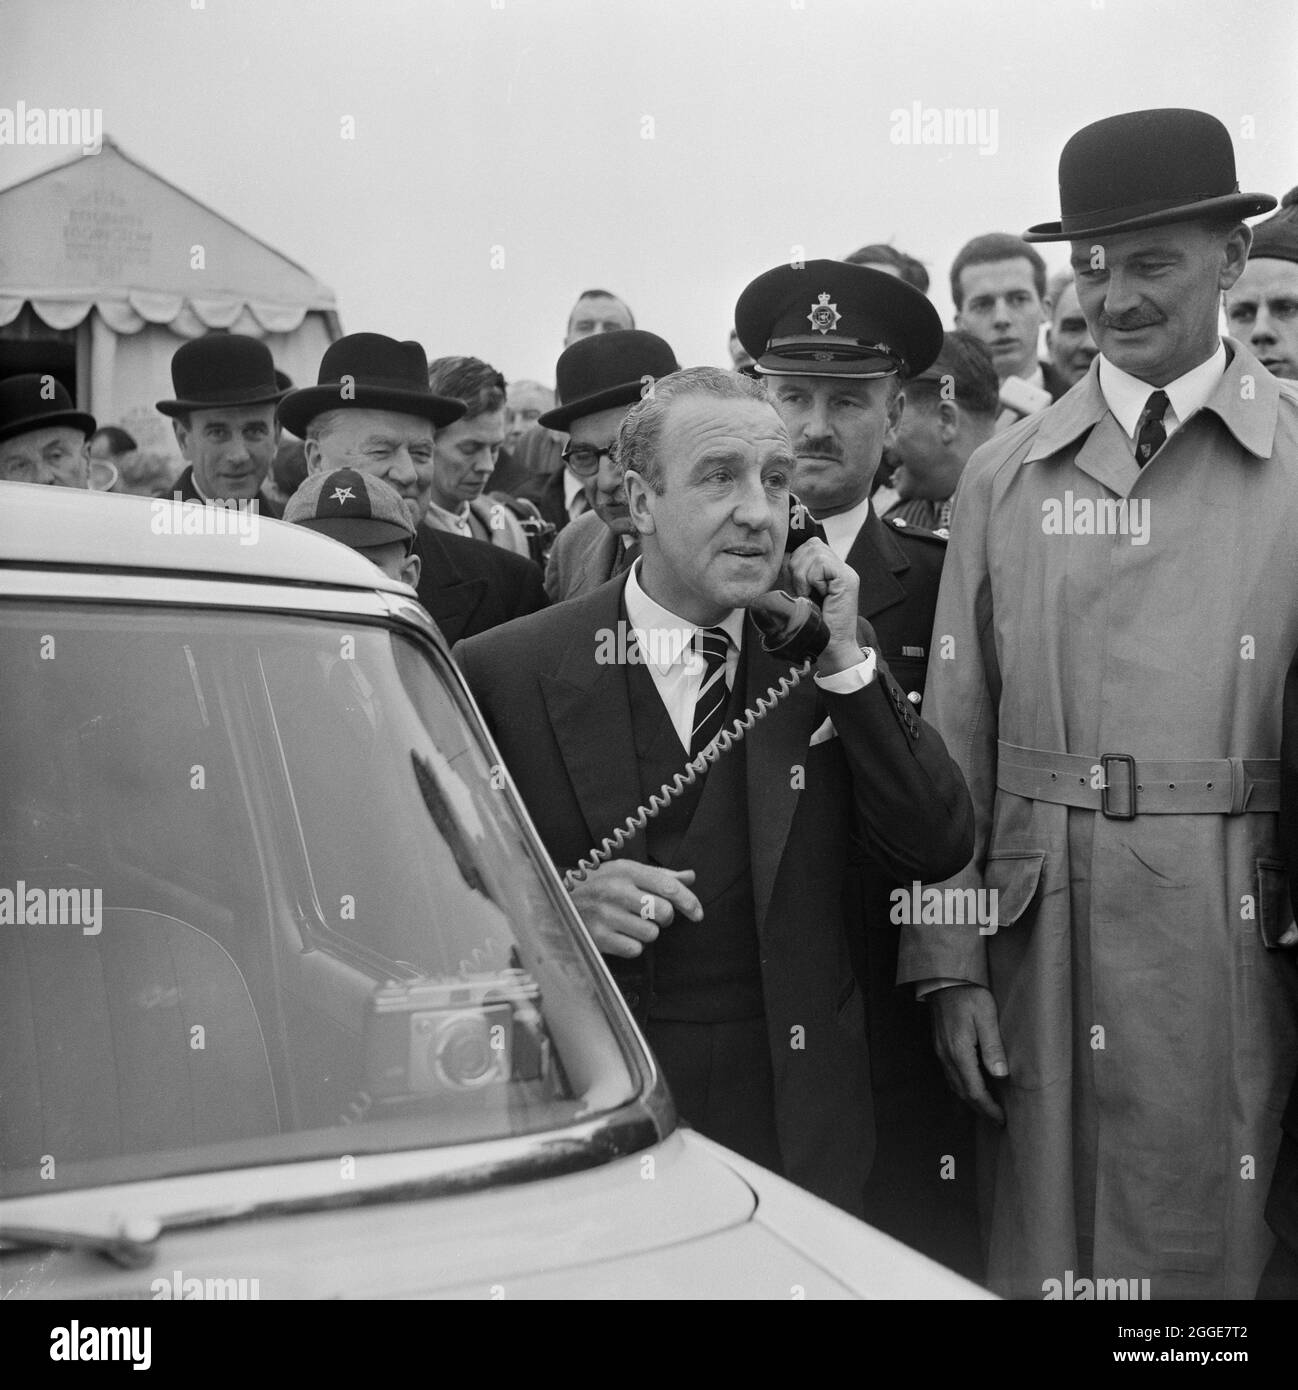 The Minister of Transport, Ernest Marples, using a police car's radio telephone to order the barriers to be removed on the M1 at the opening ceremony of the motorway. This image was catalogued as part of the Breaking New Ground Project in partnership with the John Laing Charitable Trust in 2019-20. Stock Photo